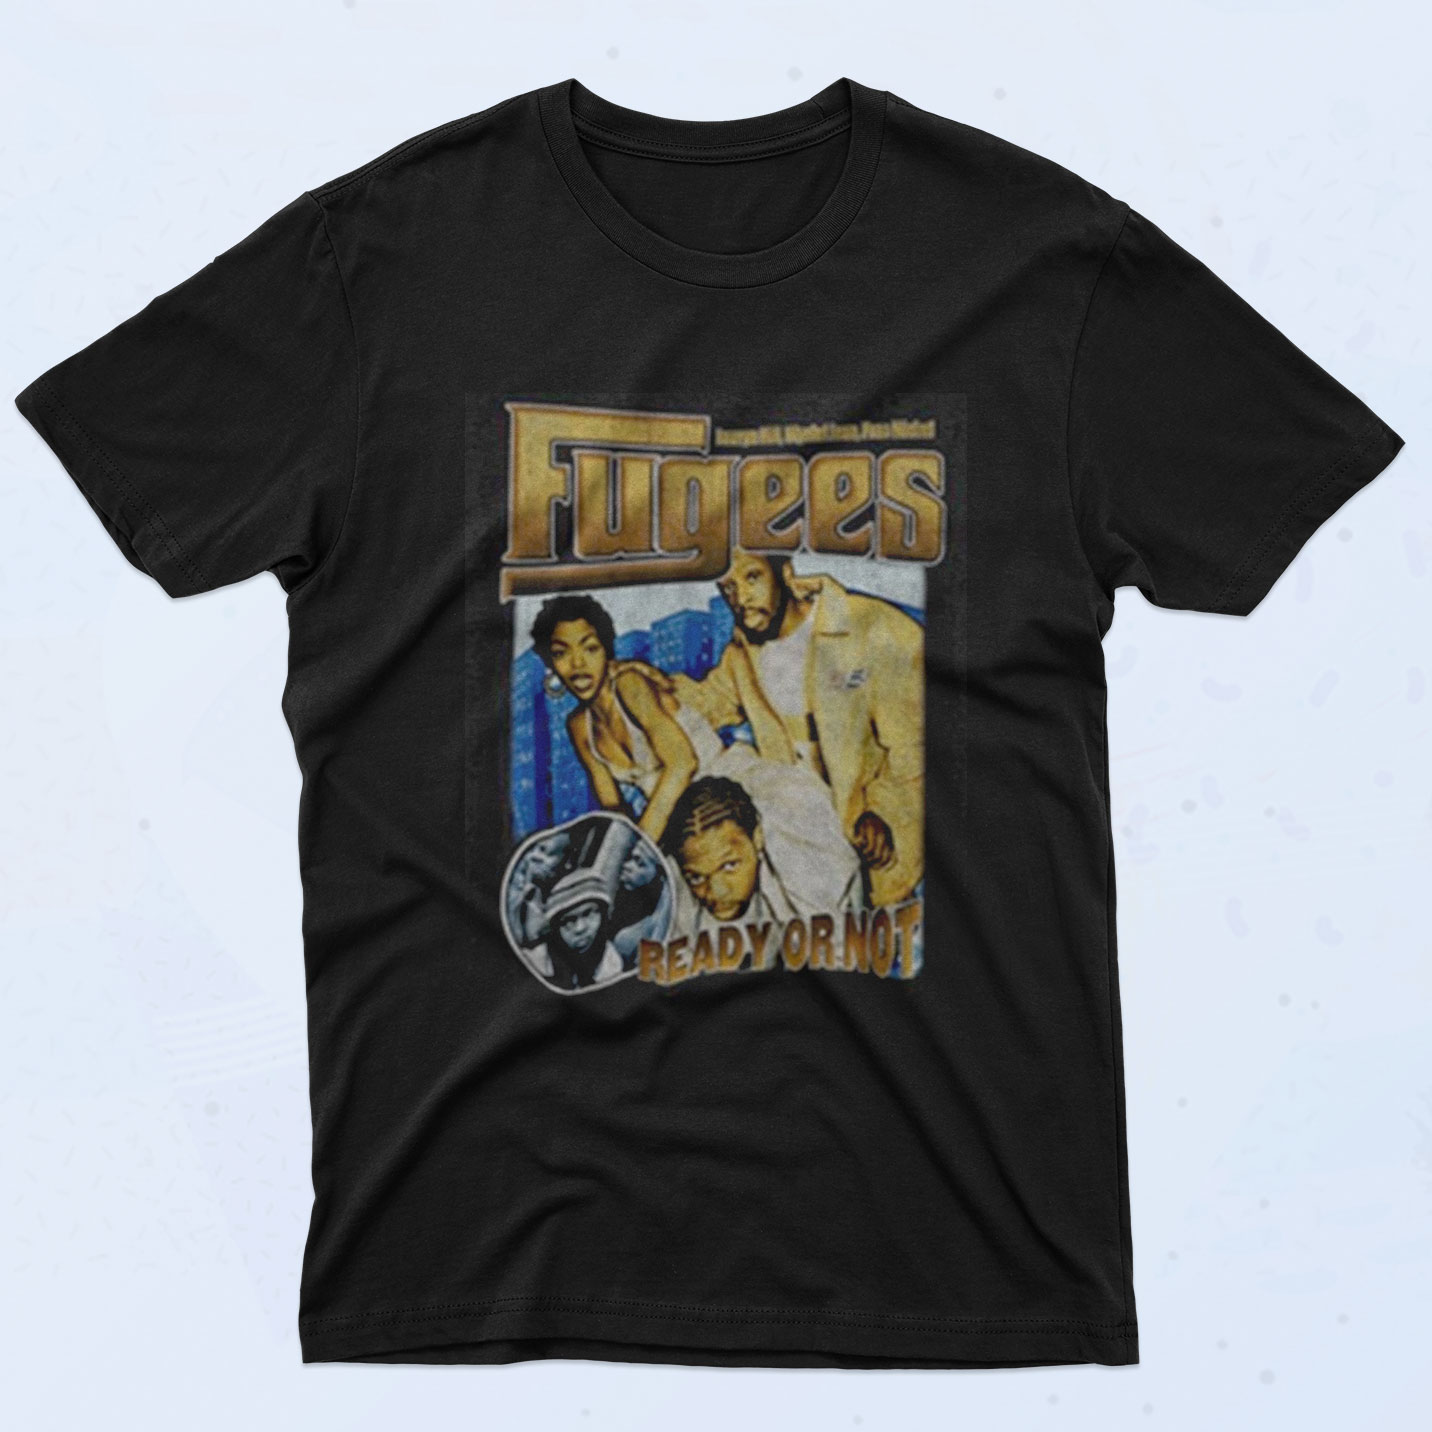 Fugees Lauryn Hill Ready Or Not 90s T Shirt Style - 90sclothes.com